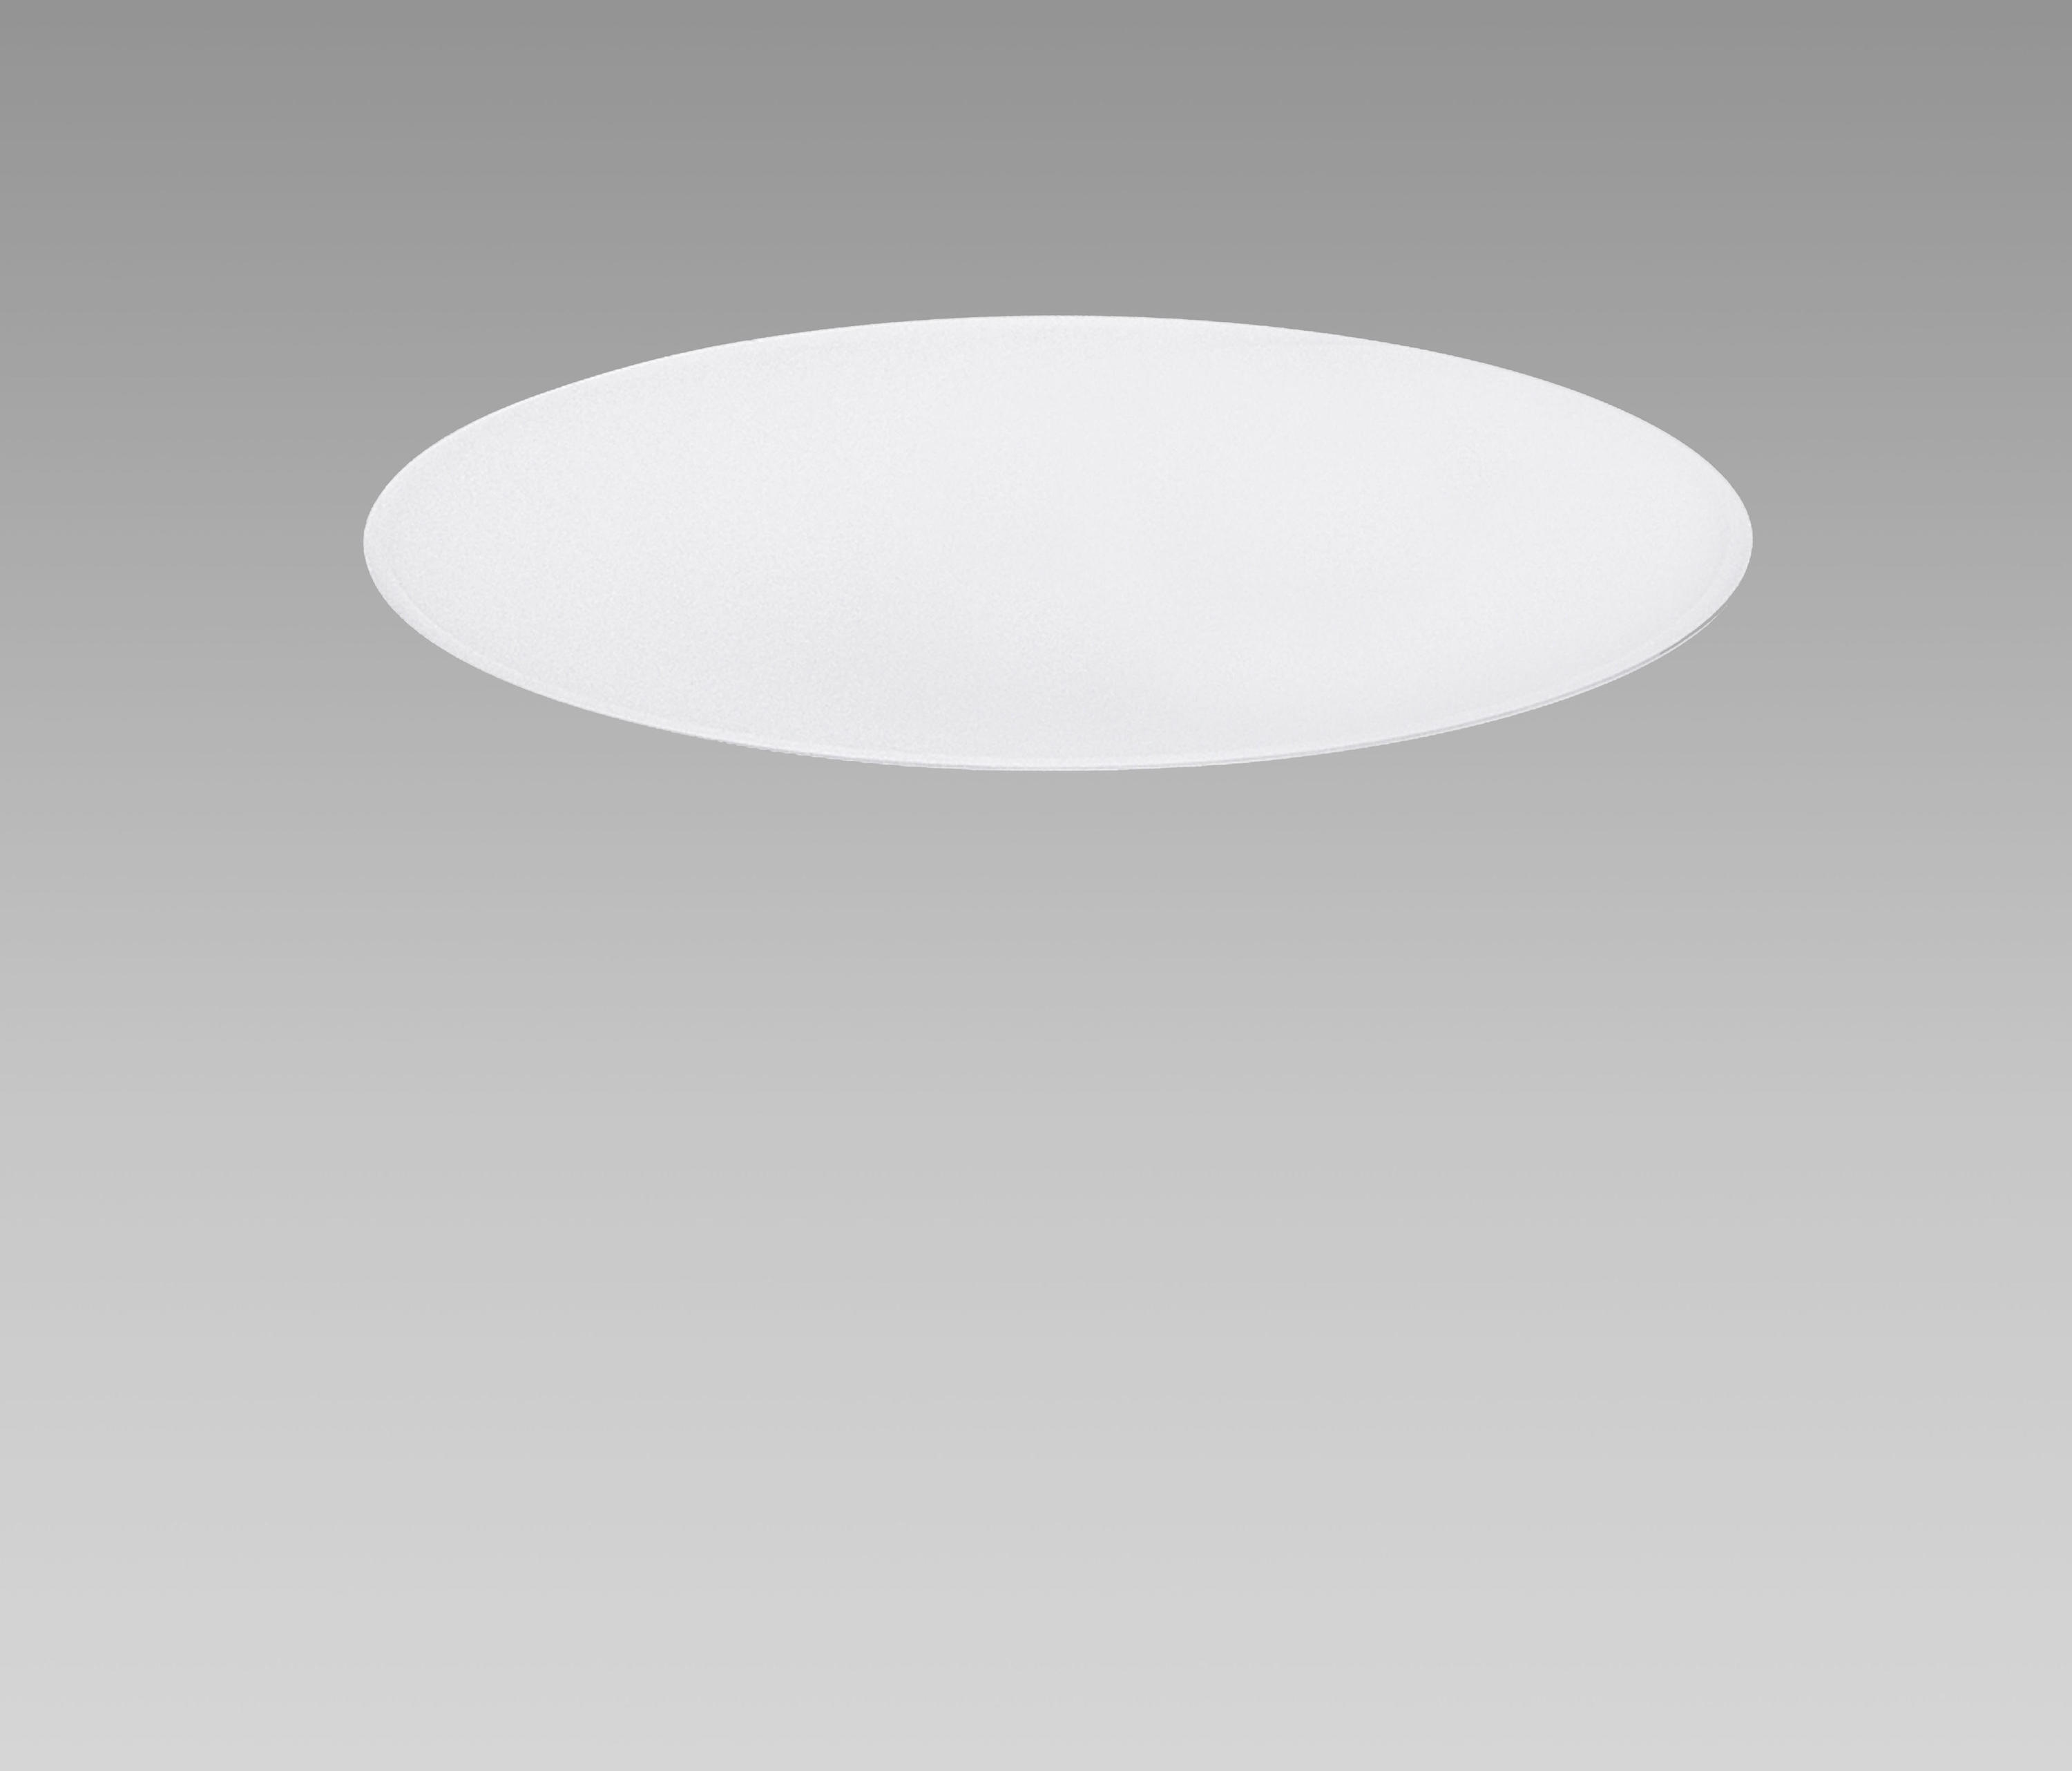 Solo Slim Led Recessed Ceiling Lights From Regent Architonic